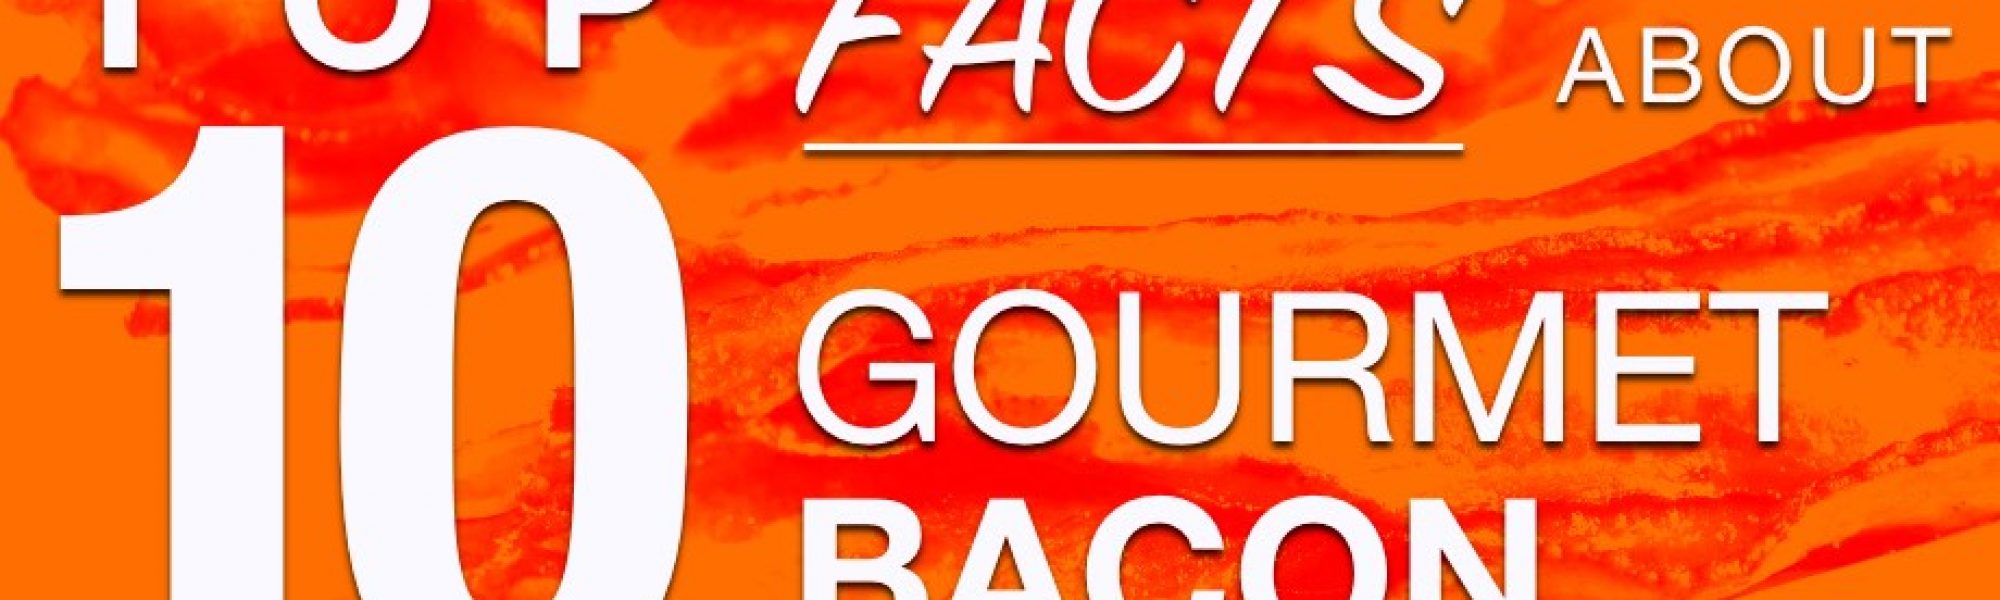 Top 10 Facts About Gourmet Bacon via Bacon Scouts